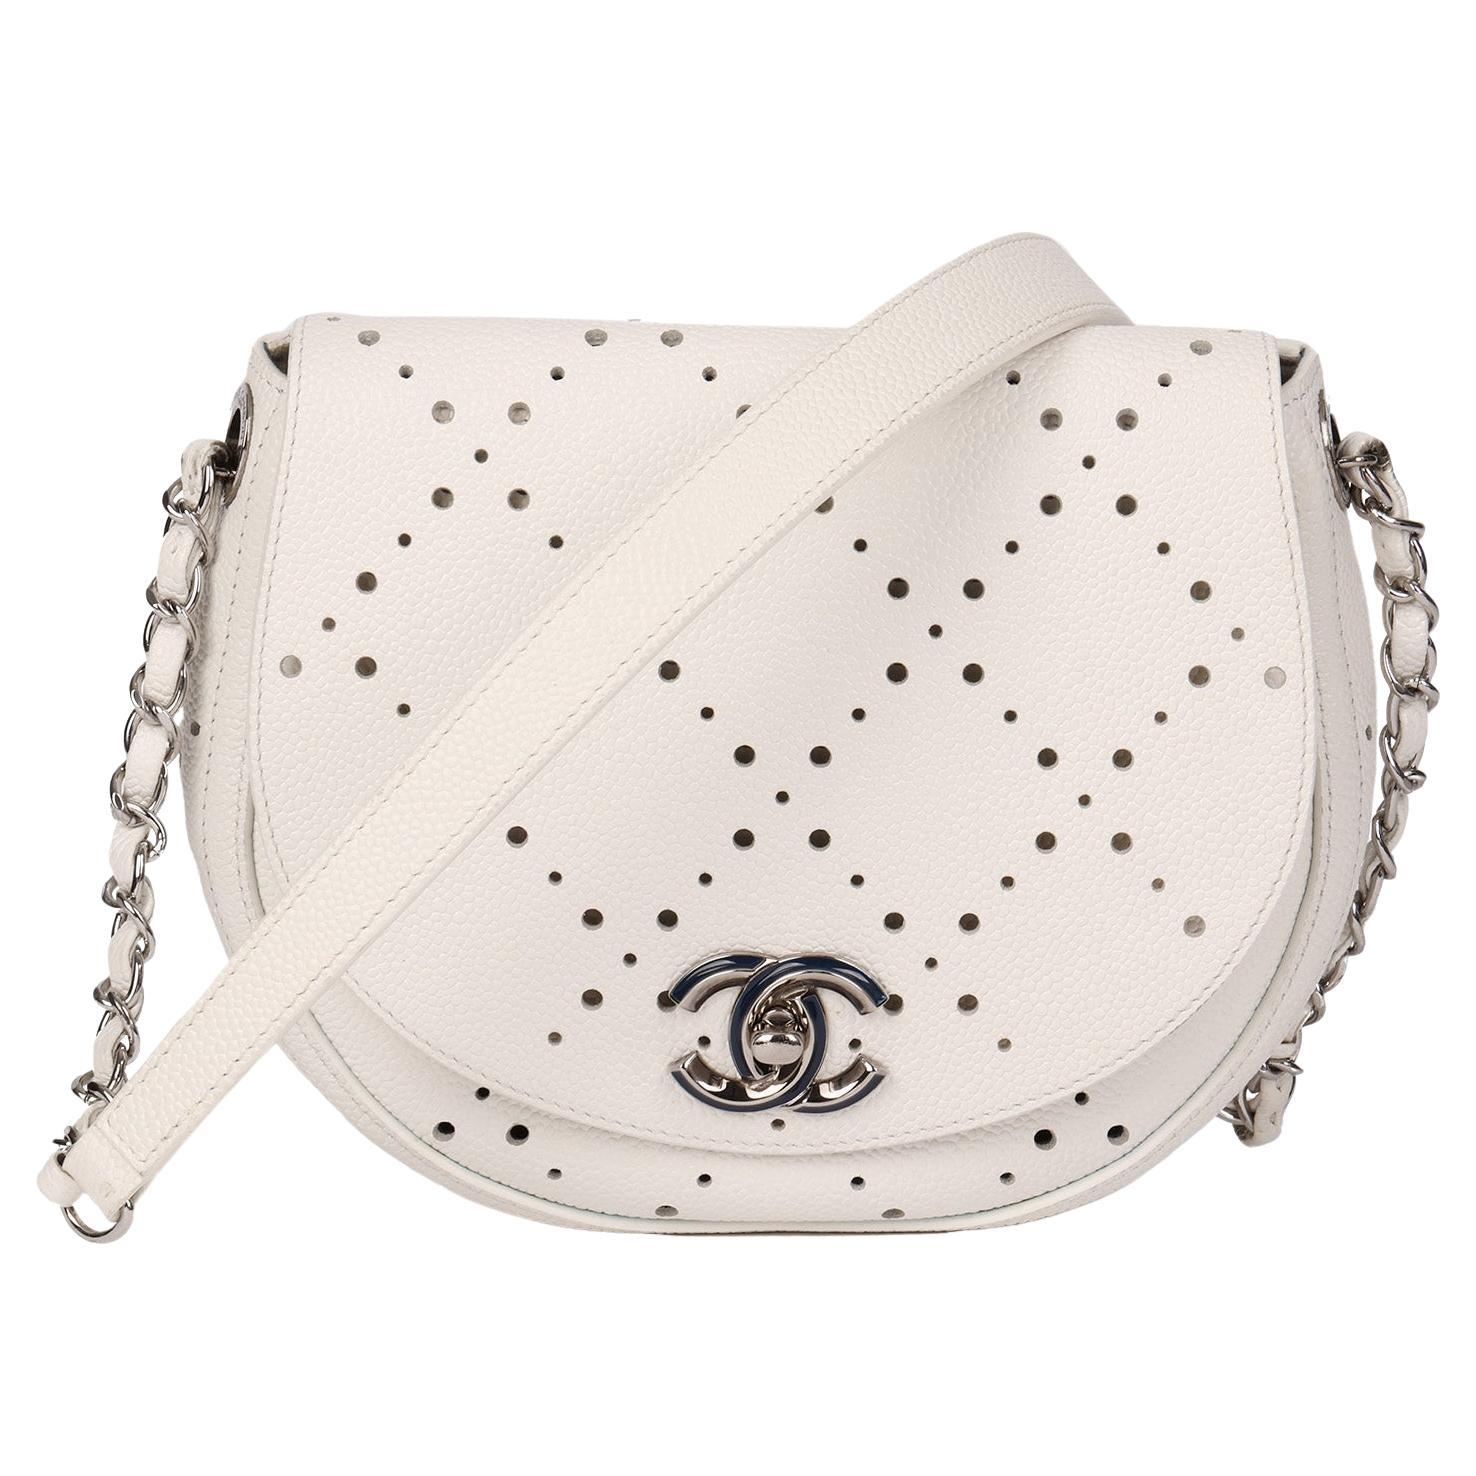 CHANEL White Perforated Caviar Leather CC Perforated Shoulder Bag